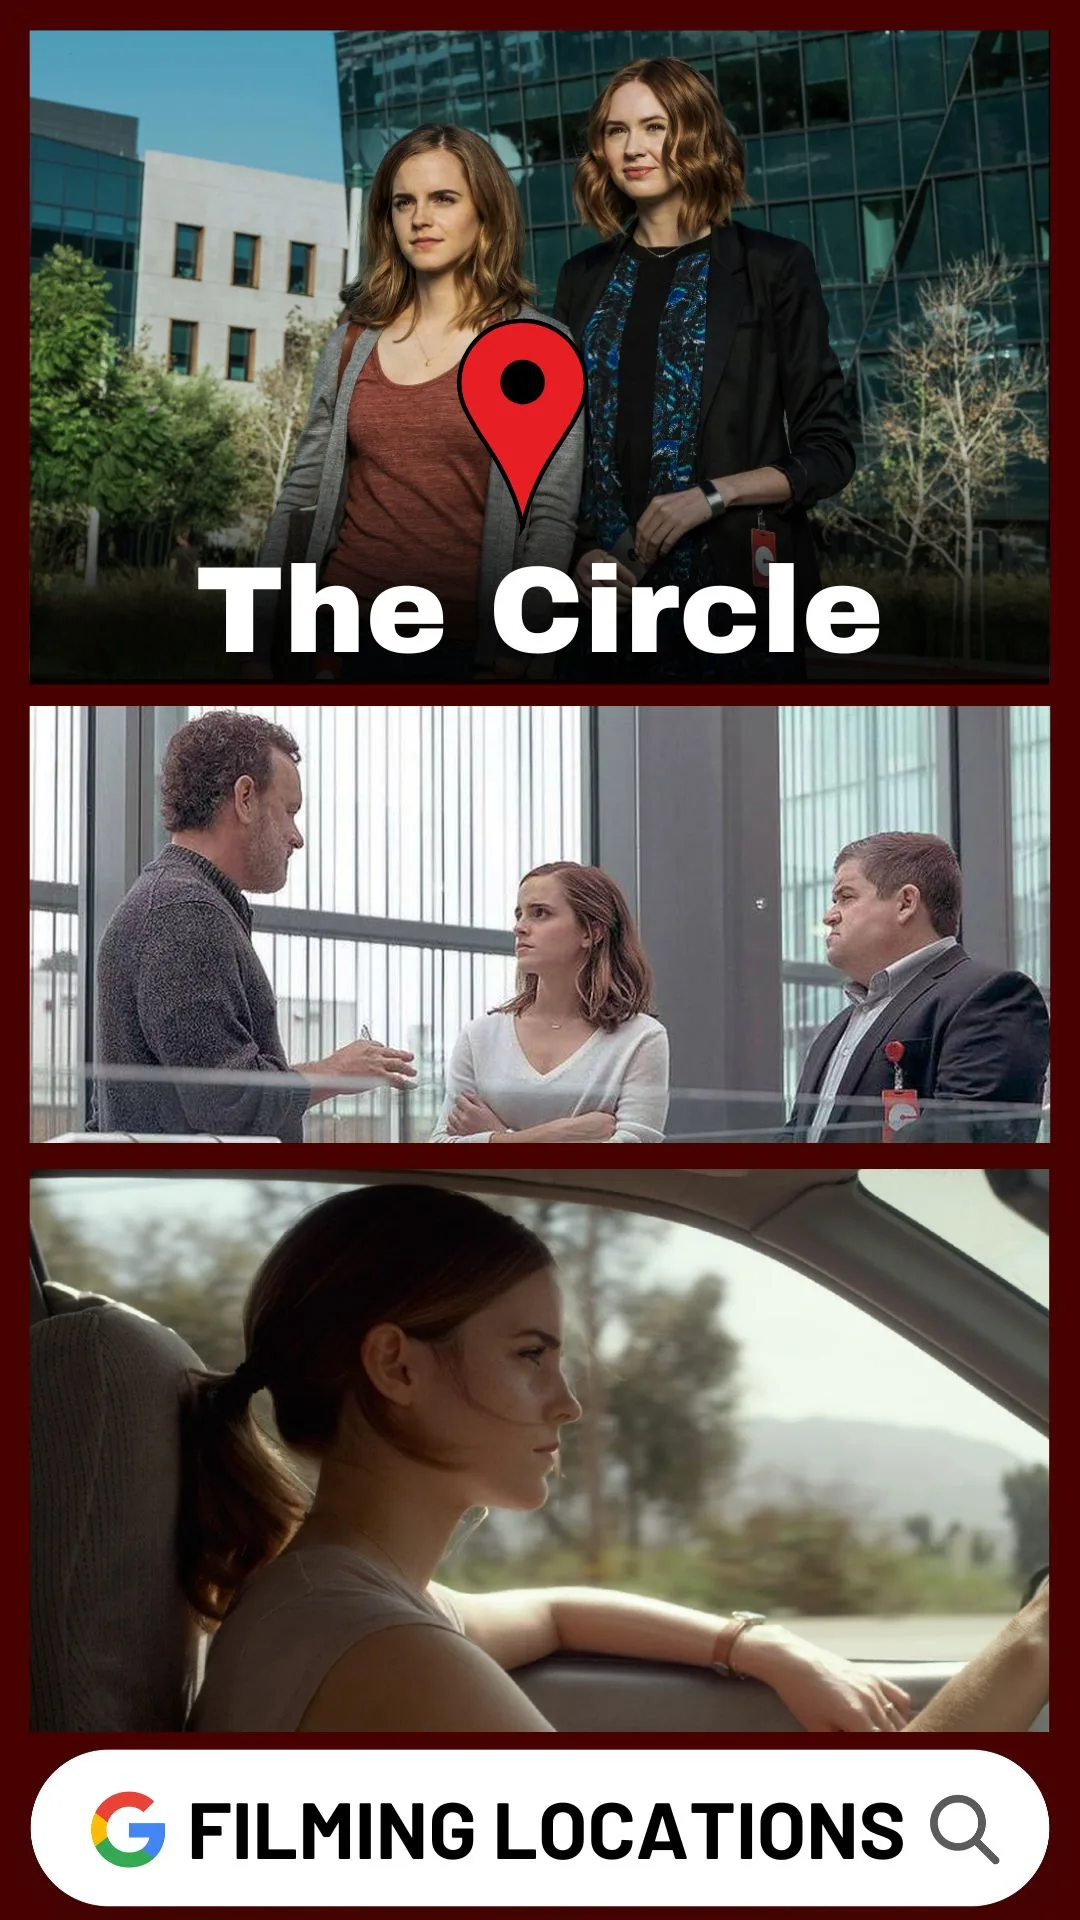 The Circle Filming Locations